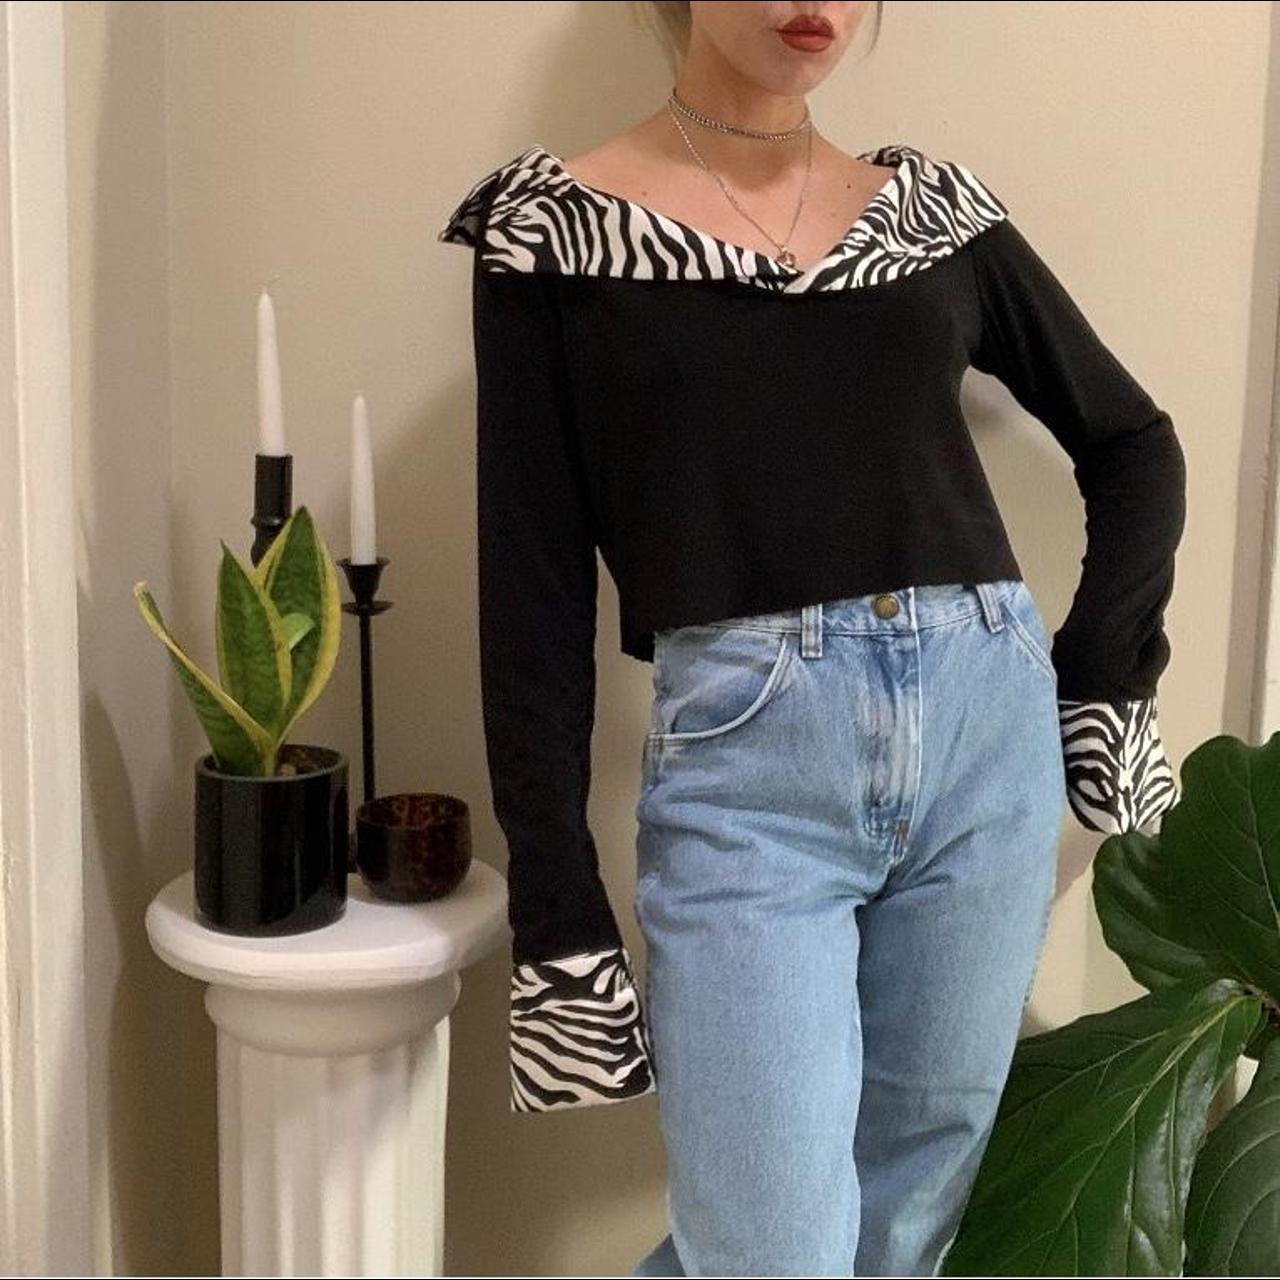 Women's Black and White Blouse